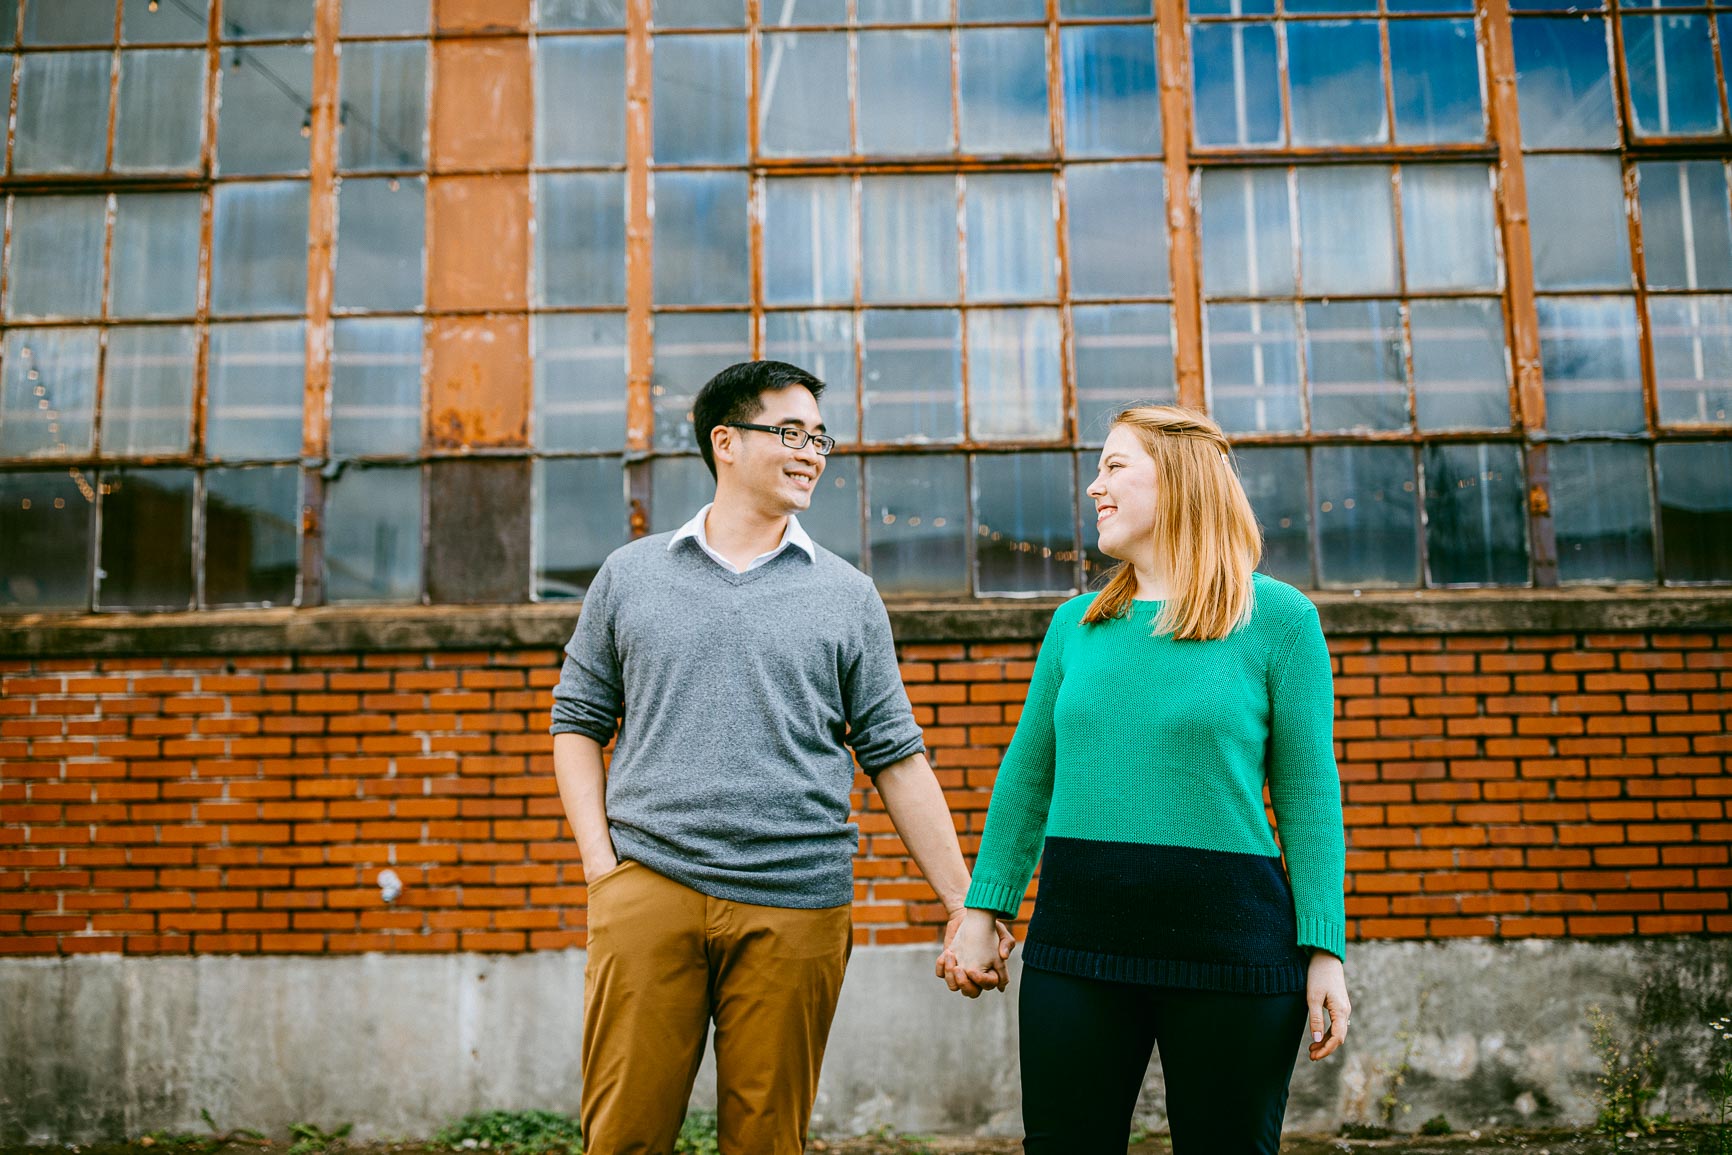 engagement session at camp north end shot by Nhieu Tang Photography | nhieutang.com